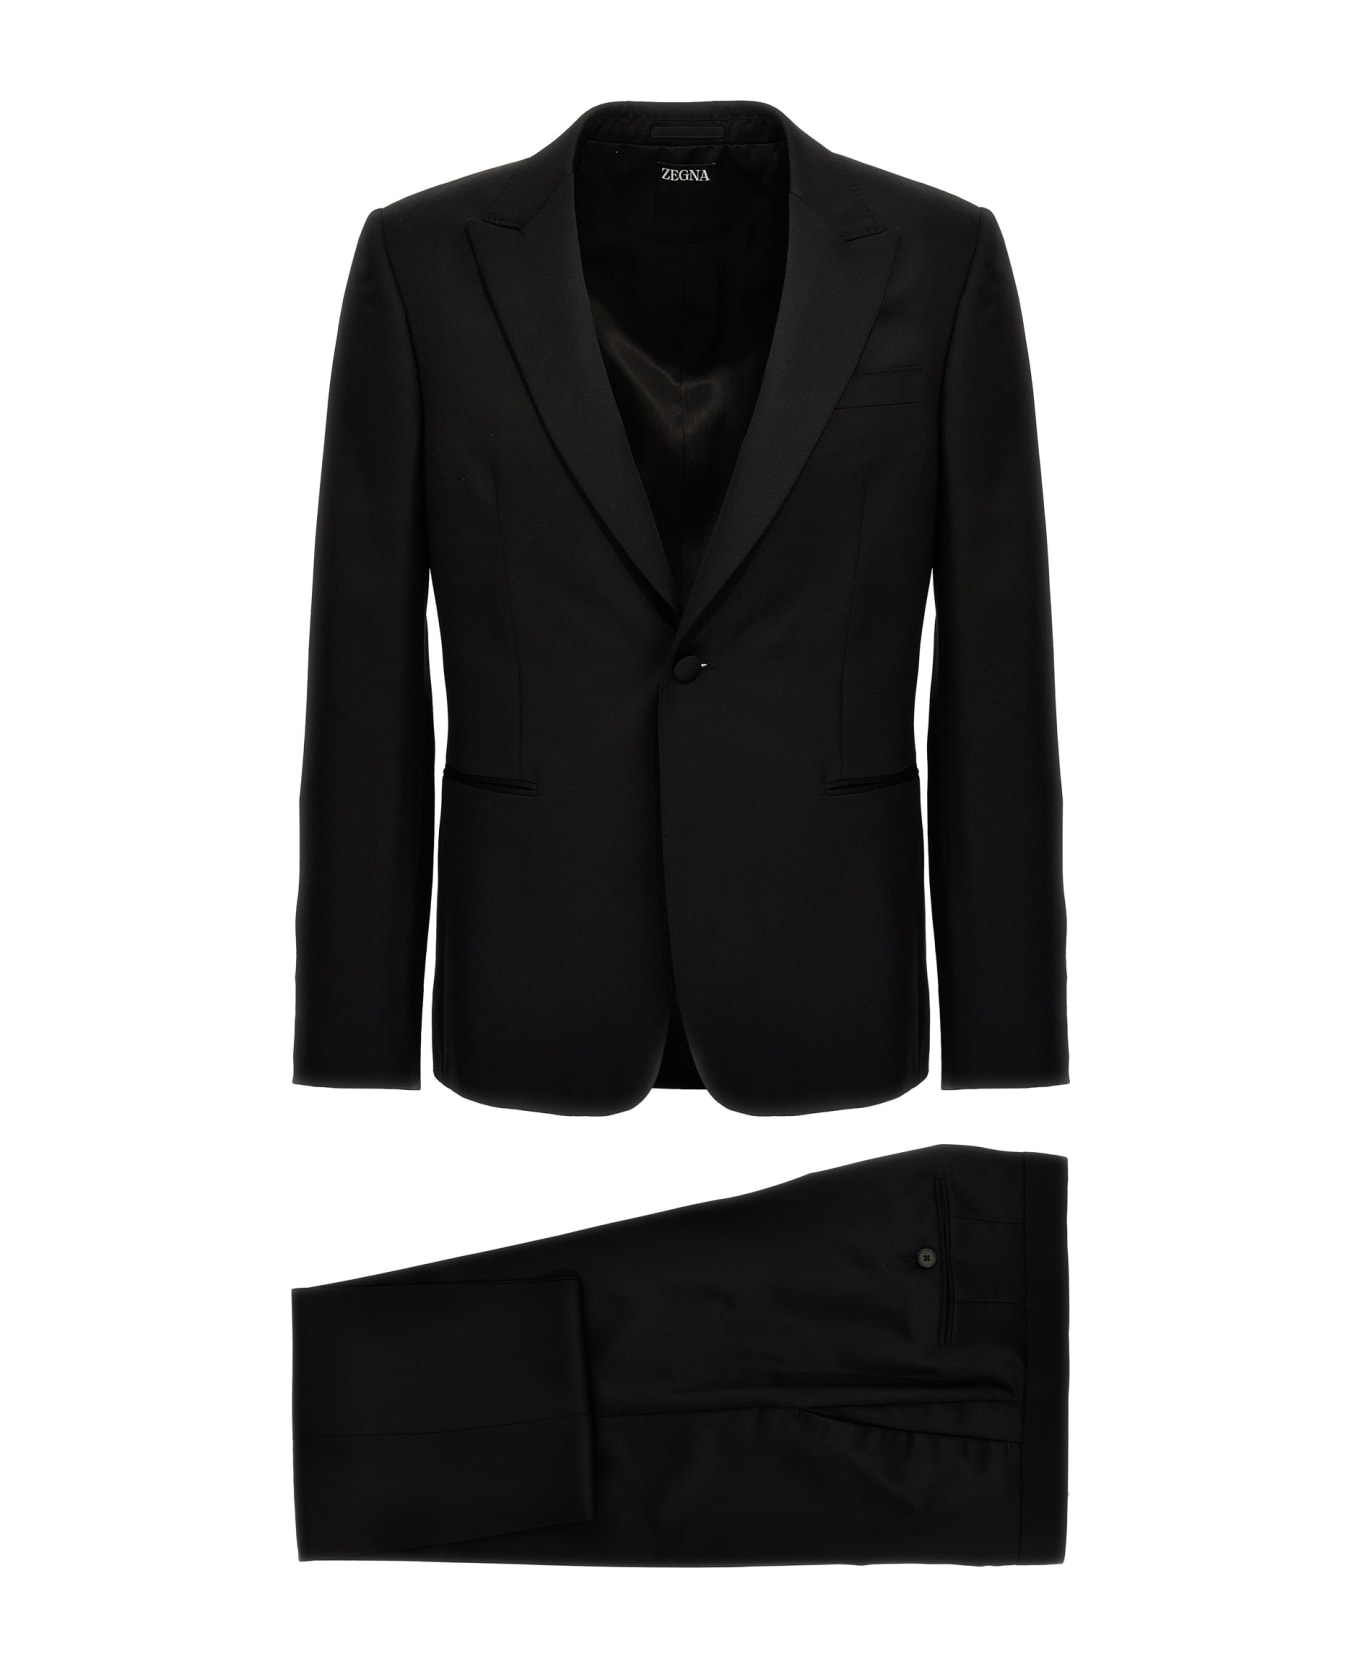 Zegna Wool And Mohair Suit - Black  